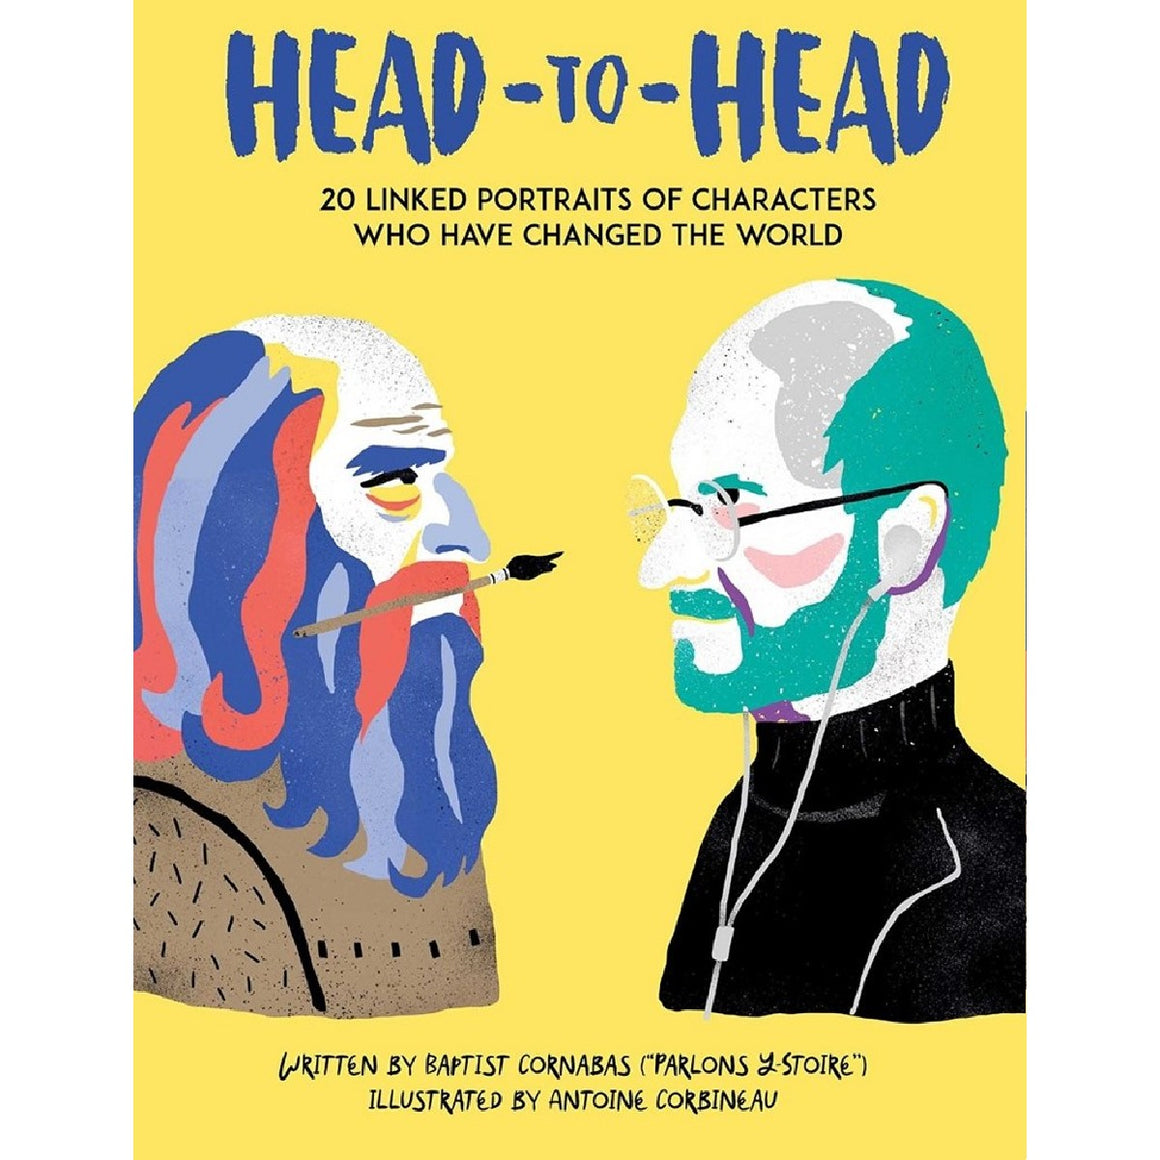 Head-to-Head: 18 Linked Portraits of People Who Changed the World | Author: Baptist Cornabas